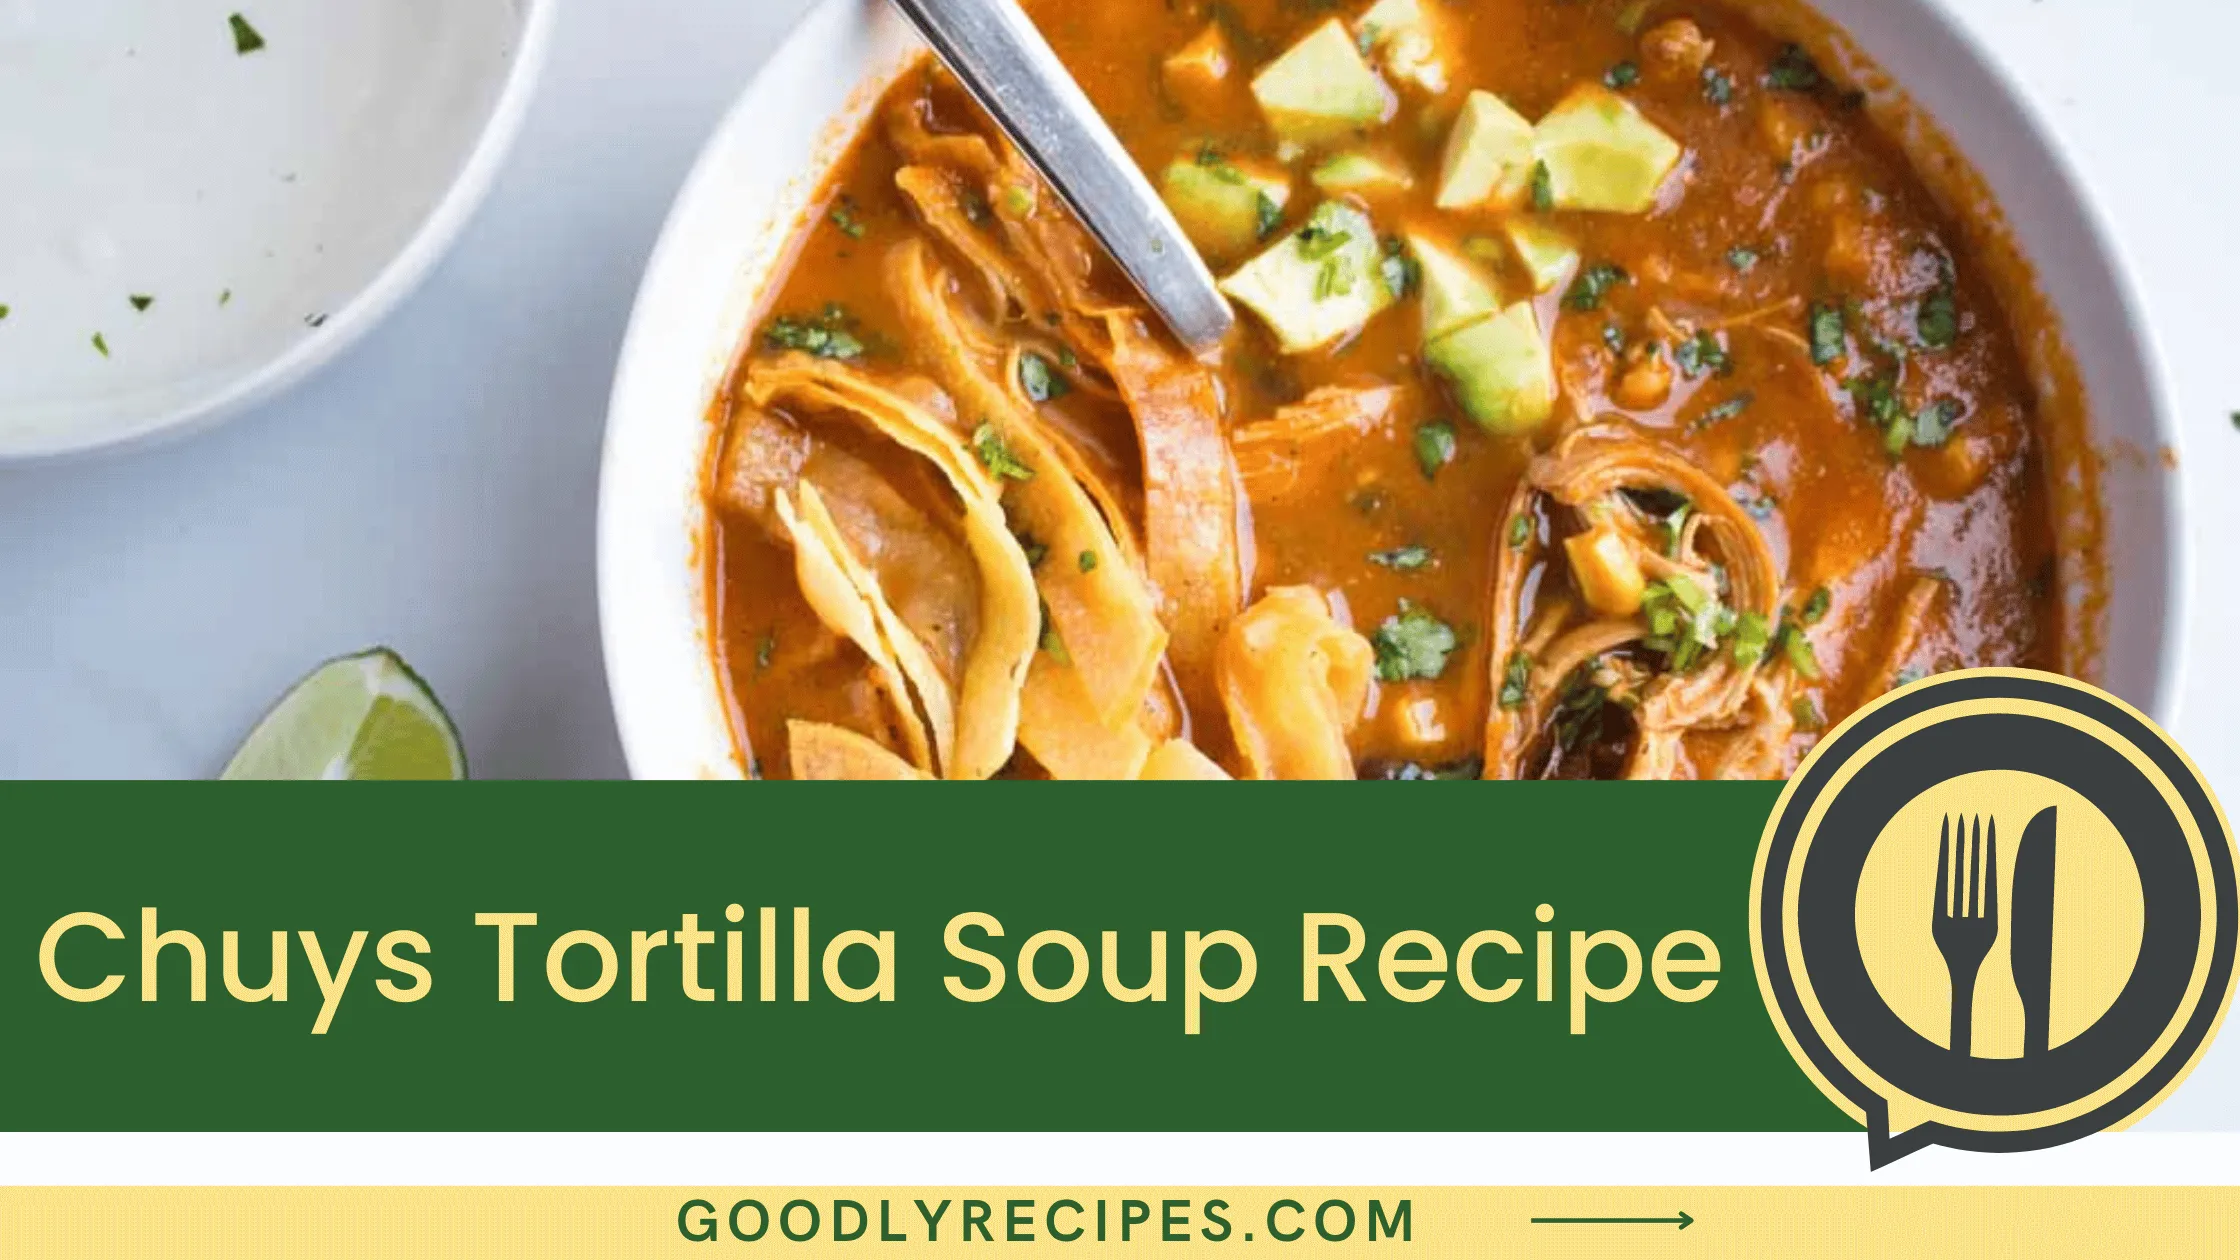 Chuys Tortilla Soup Recipe - For Food Lovers